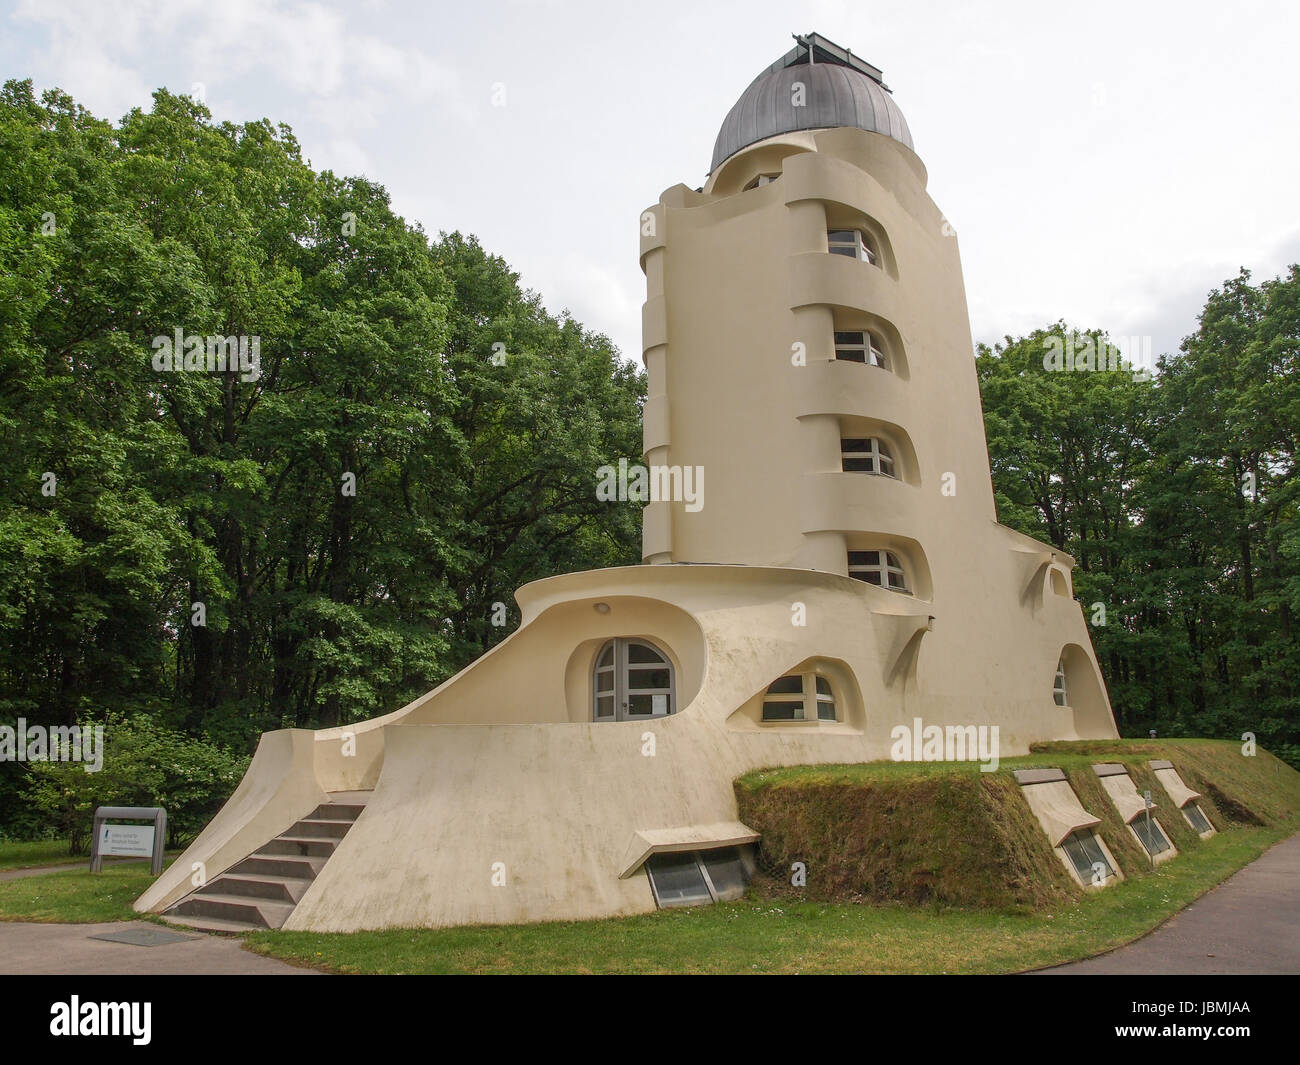 POTSDAM, GERMANY - MAY 10, 2014: The Einstein Turm astrophysical observatory was designed by architect Erich Mendelsohn in 1917 for Albert Einstein to validate his Relativity Theory Stock Photo